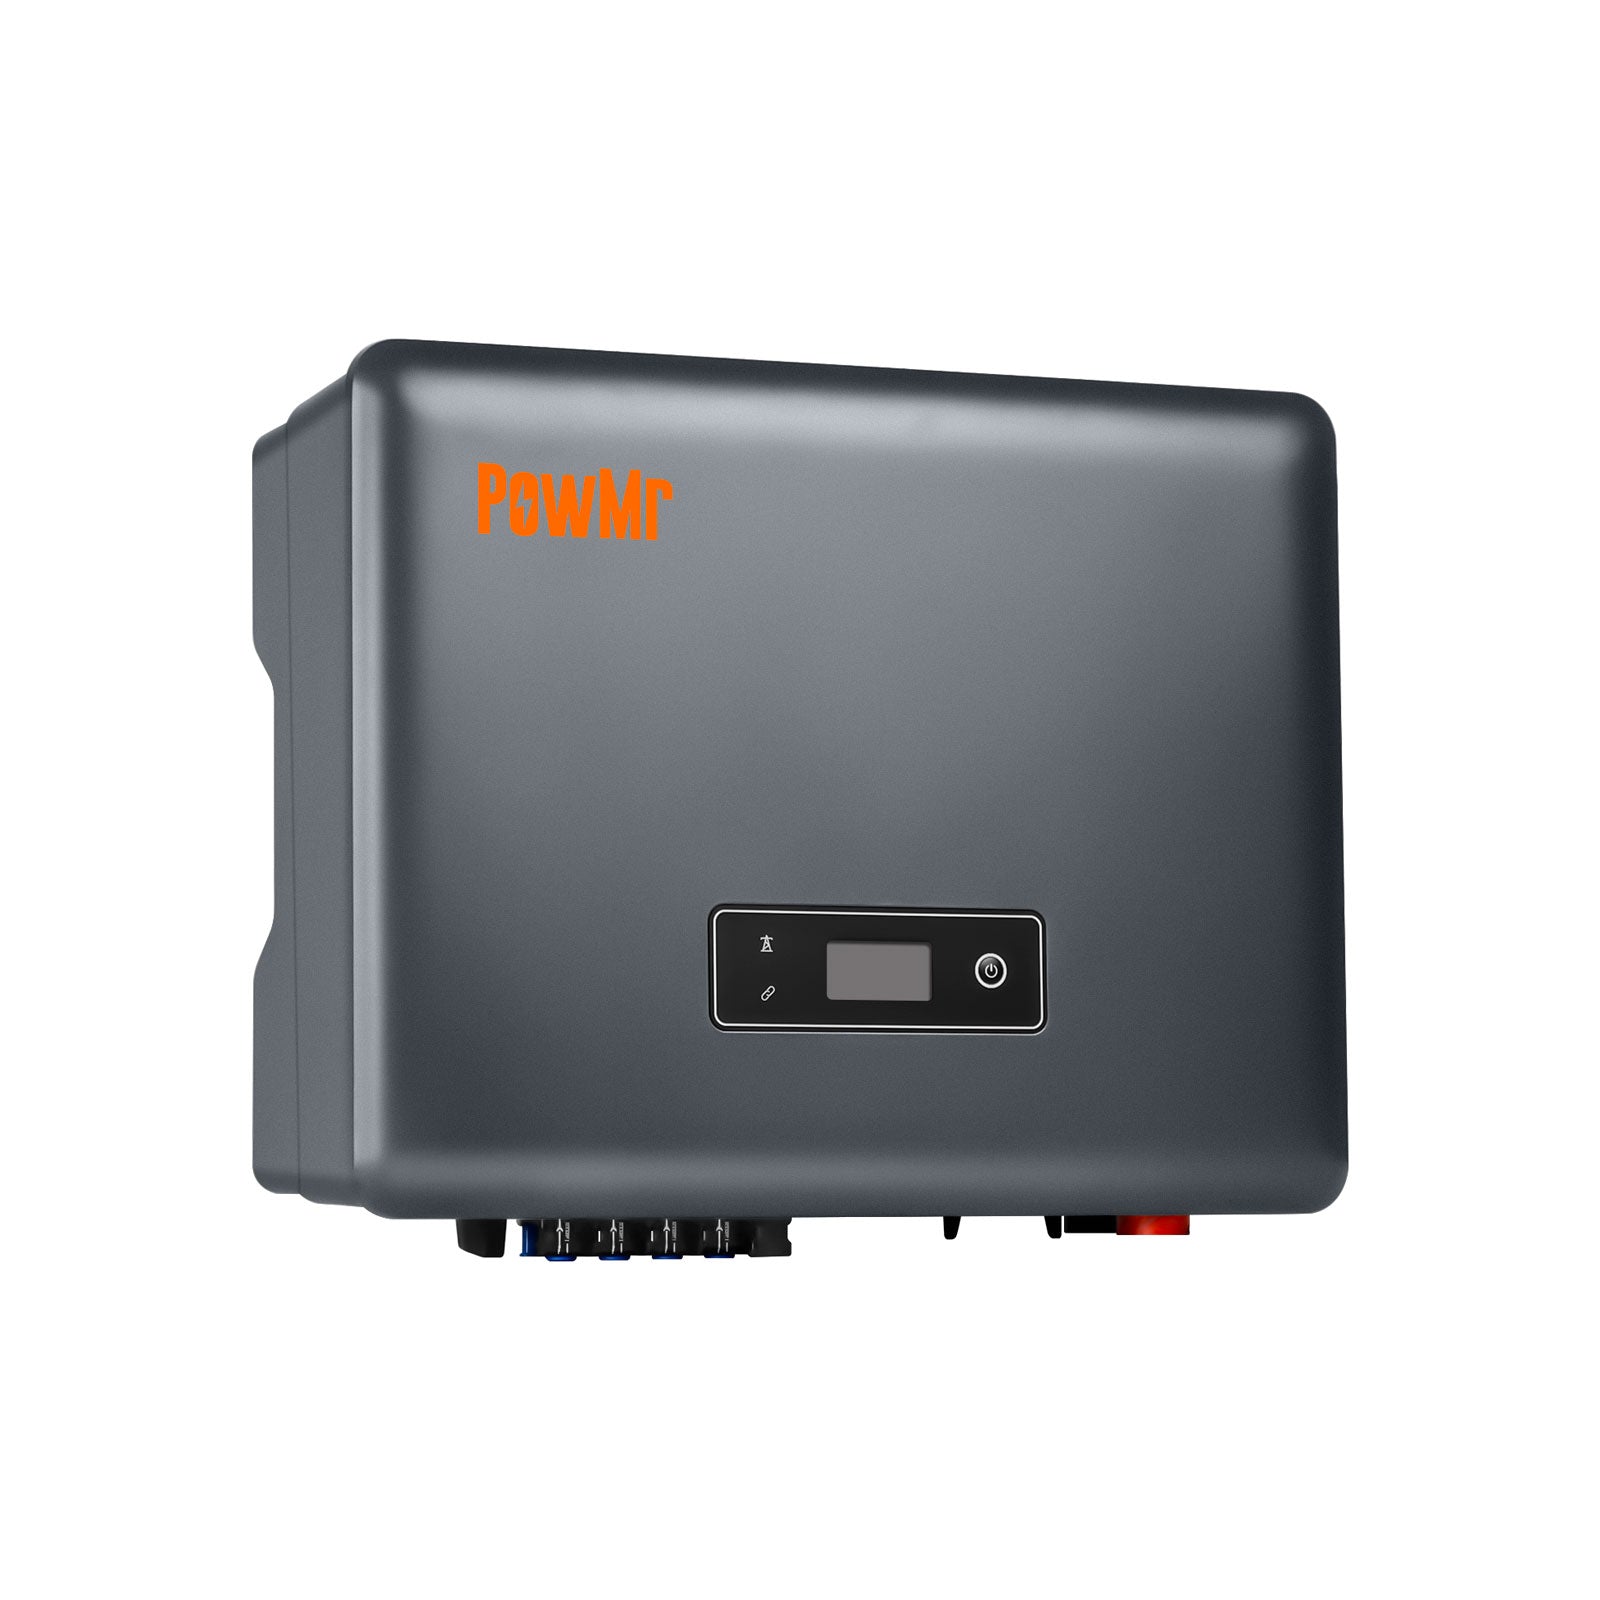 SOLXPOW X3 Series 12KW Three-Phase HV Battery 2 MPPTs Commercial Storage Inverter